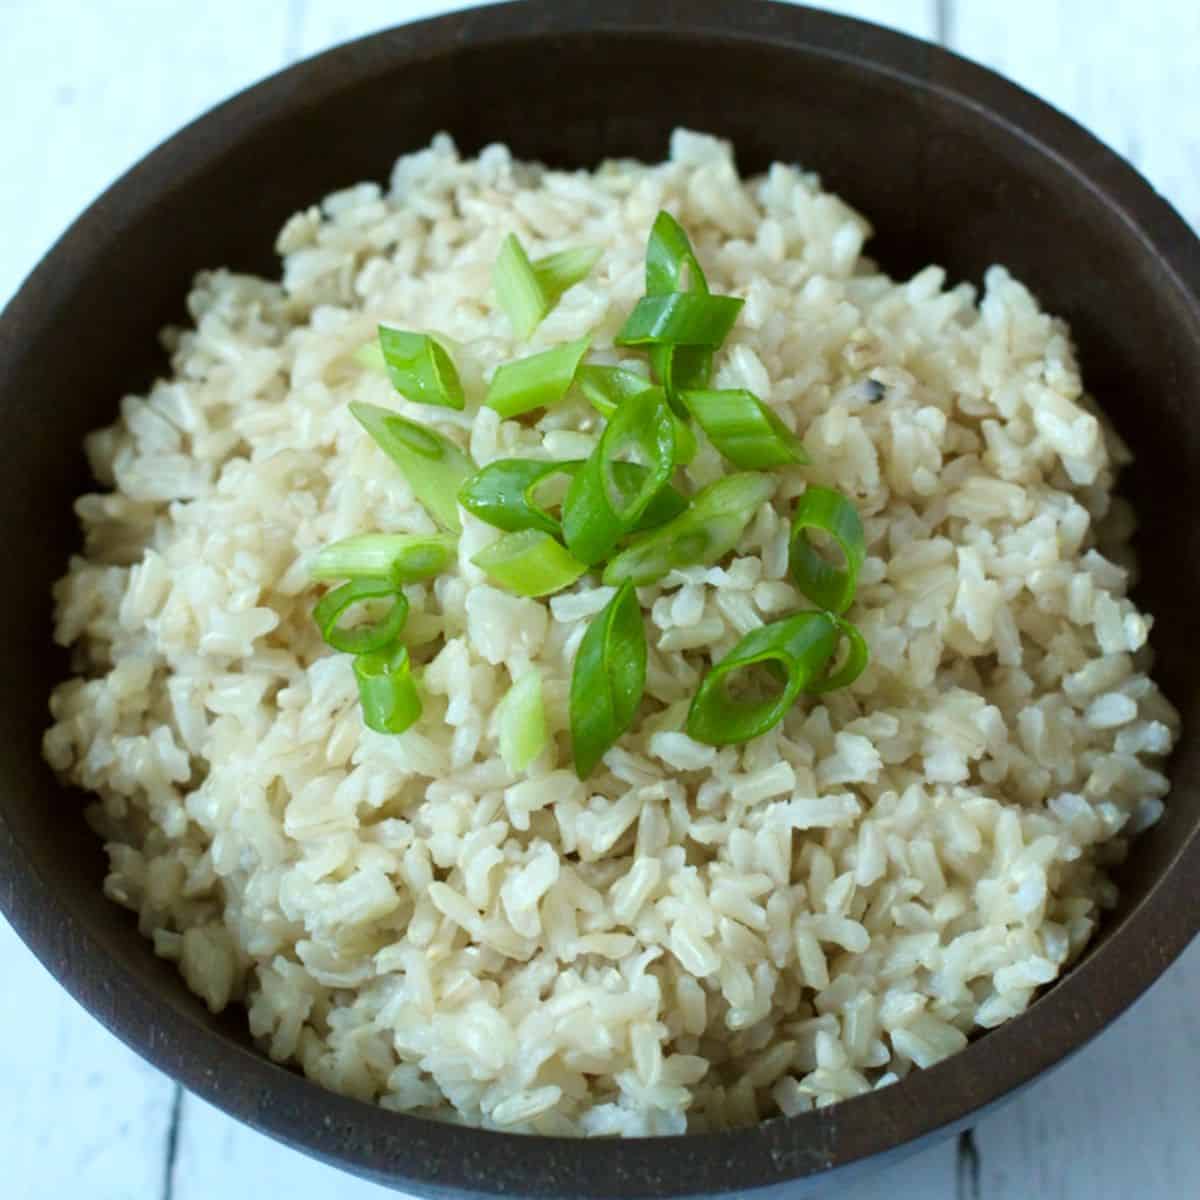 A bowl of brown rice with green onions.